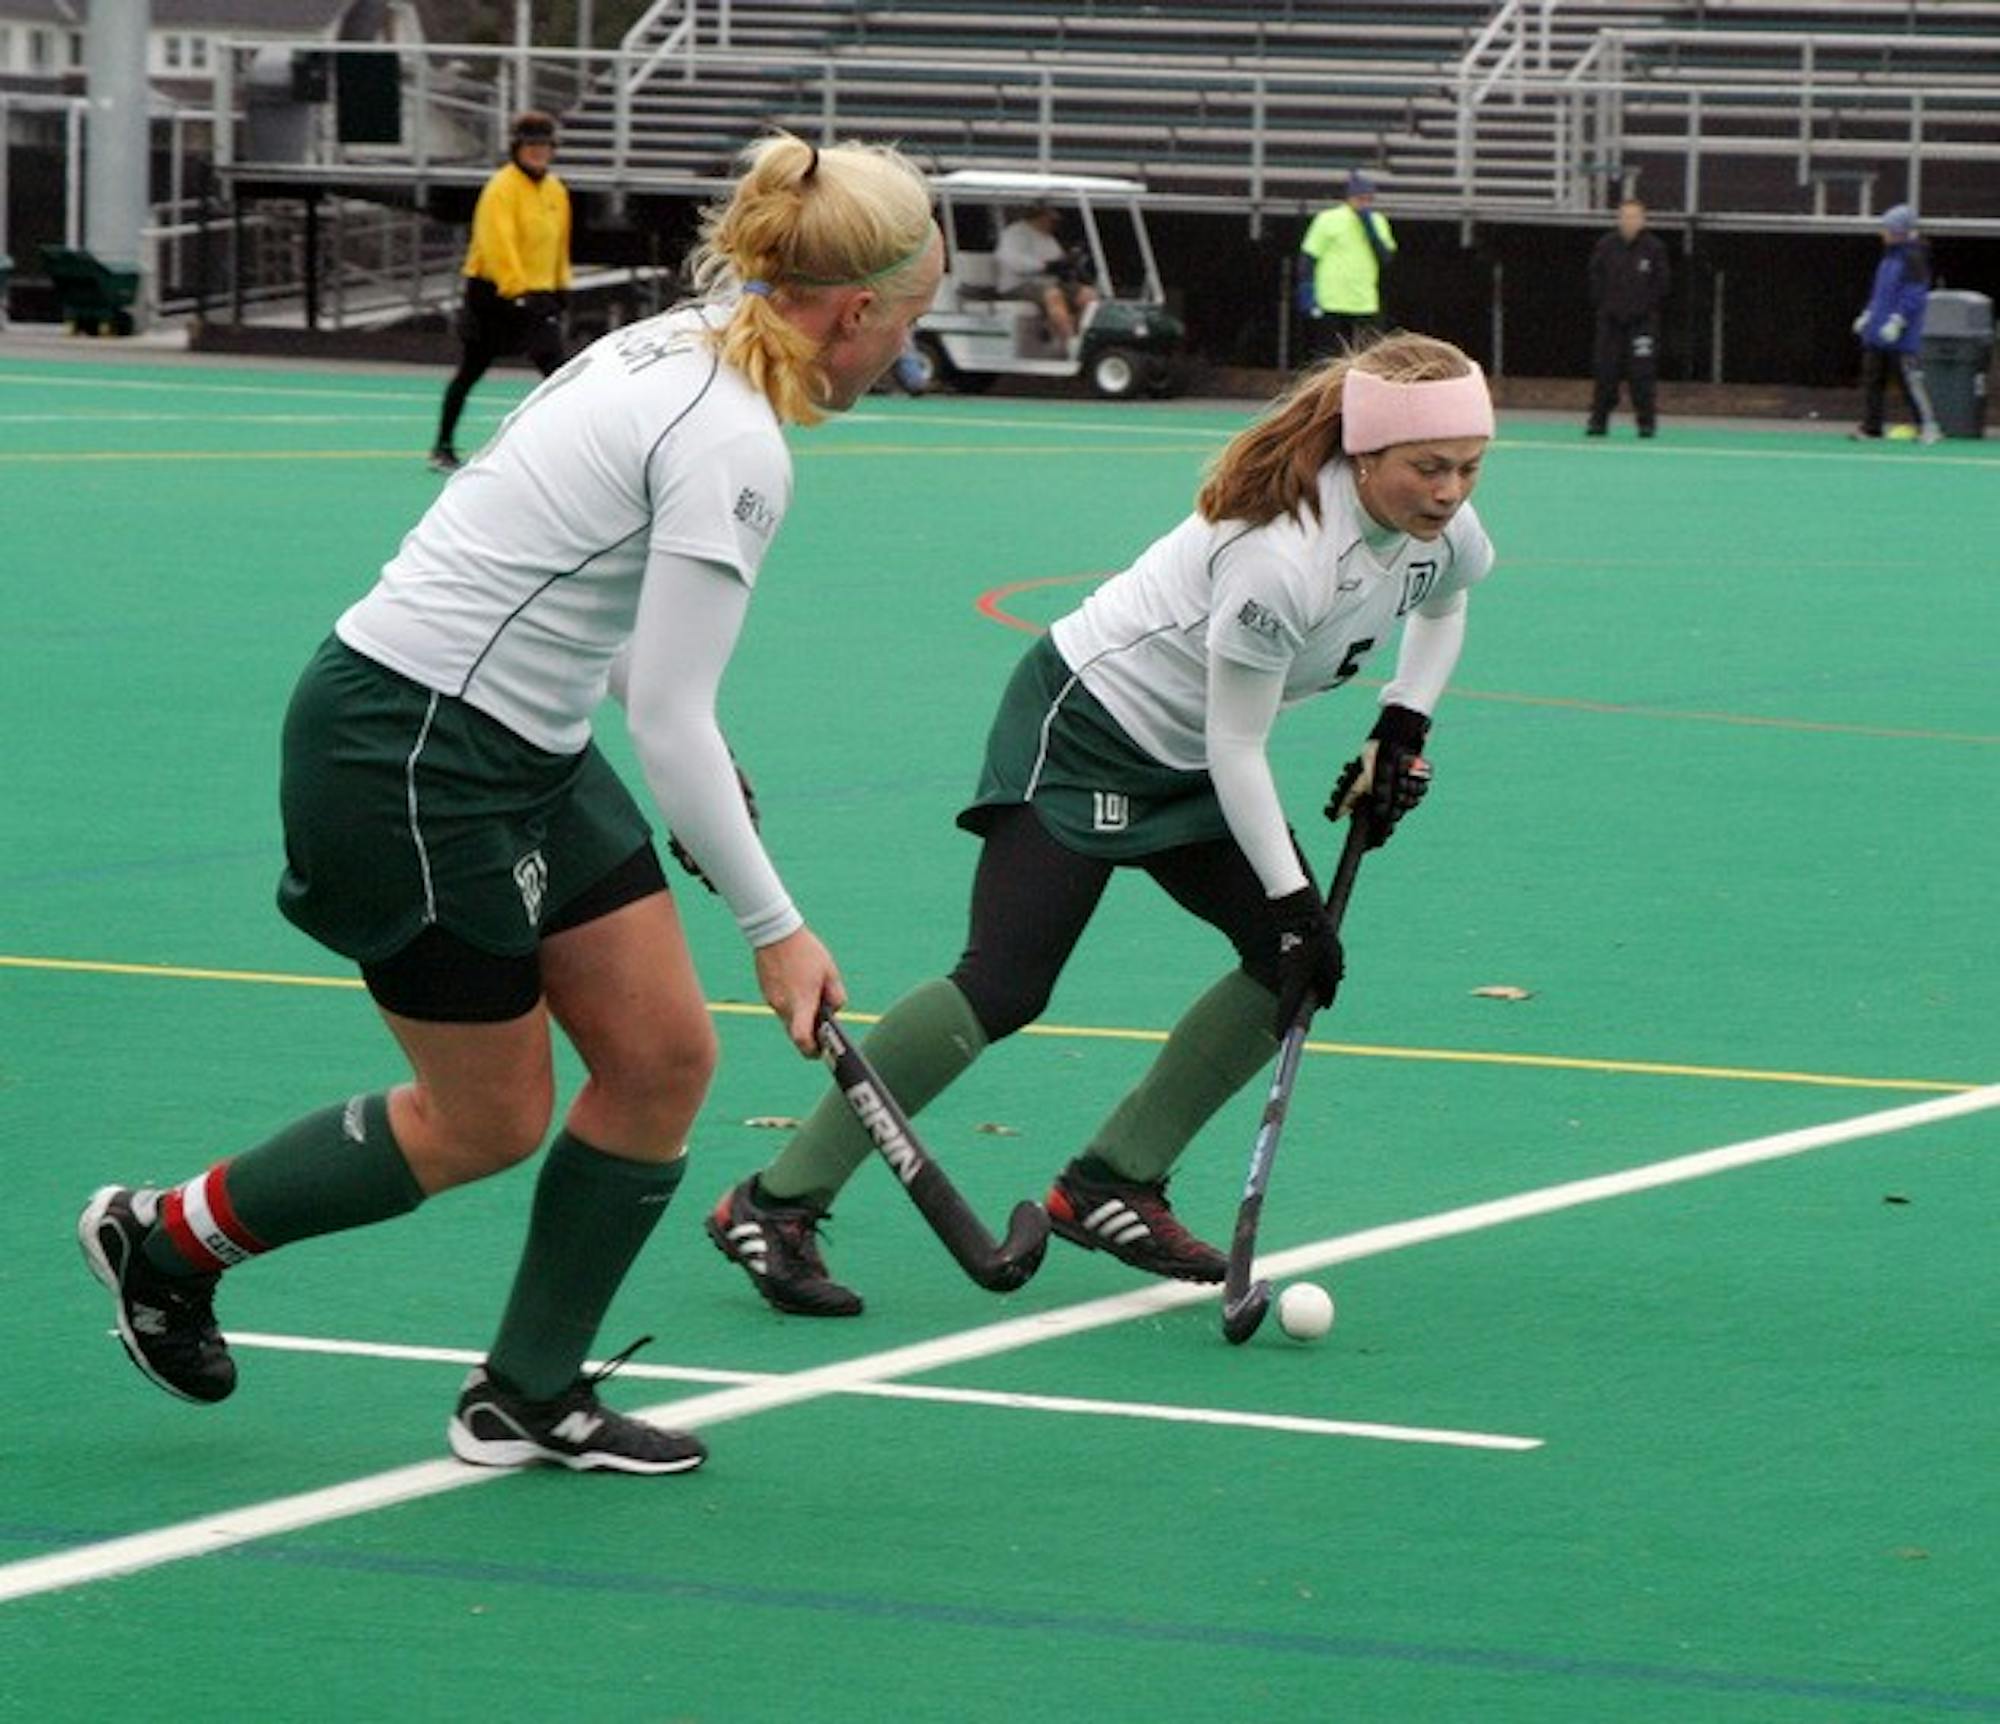 Whitney Waugh '08, right, and Allison Weinstock '10 will team up once again to take on Vermont this Wednesday.